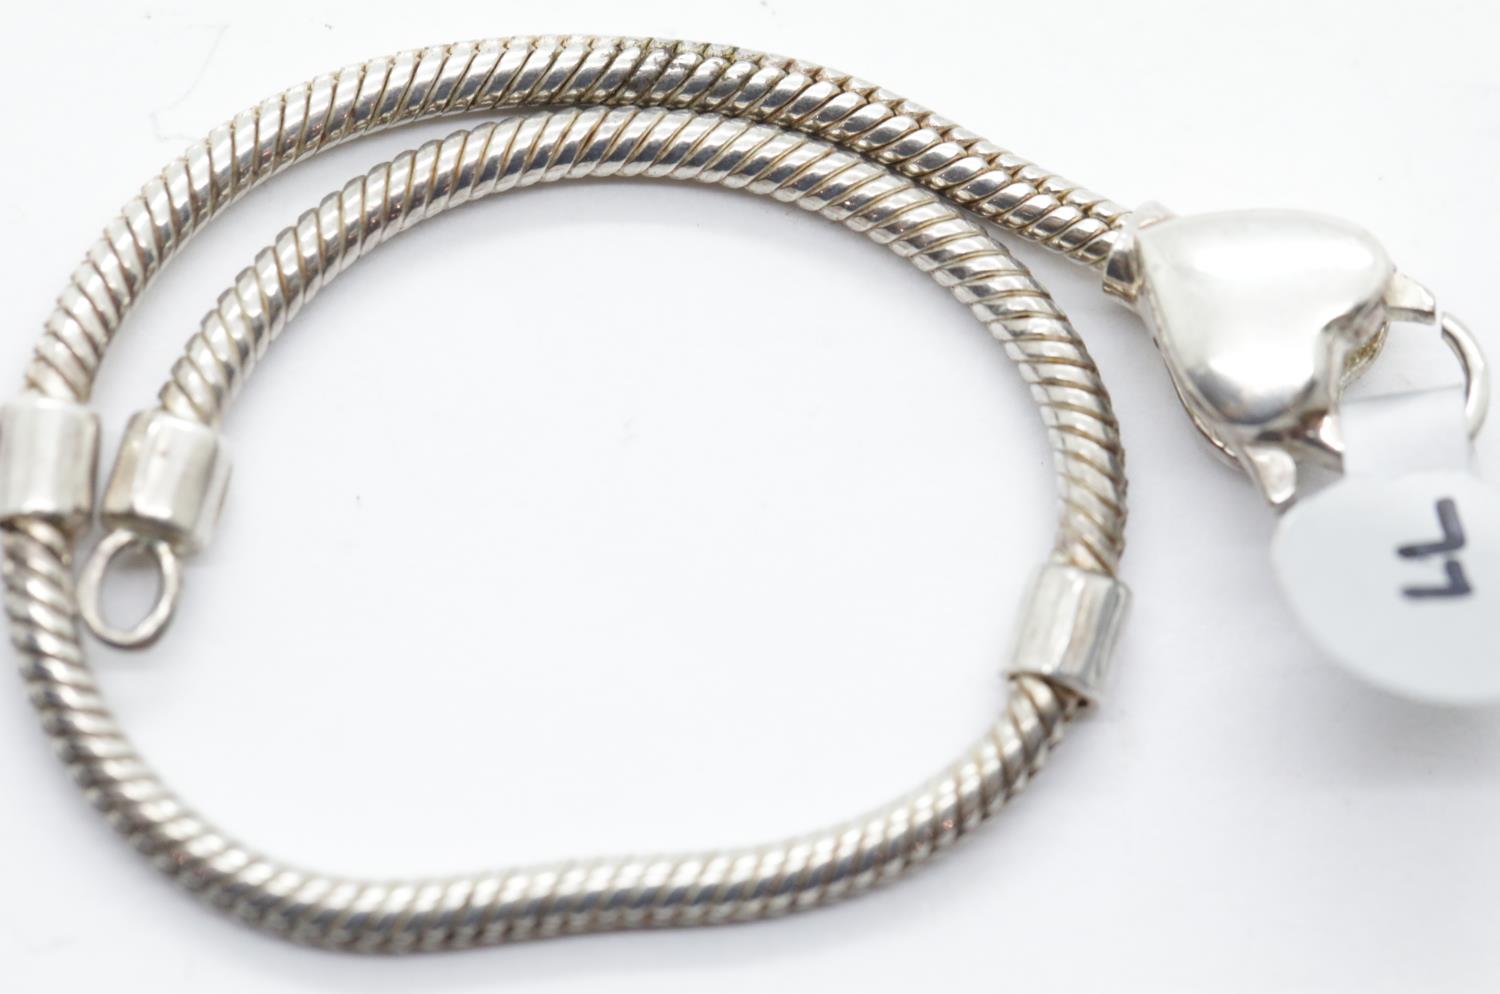 925 silver snake bracelet with heart clasp, L: 19.5 cm. P&P Group 1 (£14+VAT for the first lot - Image 2 of 2